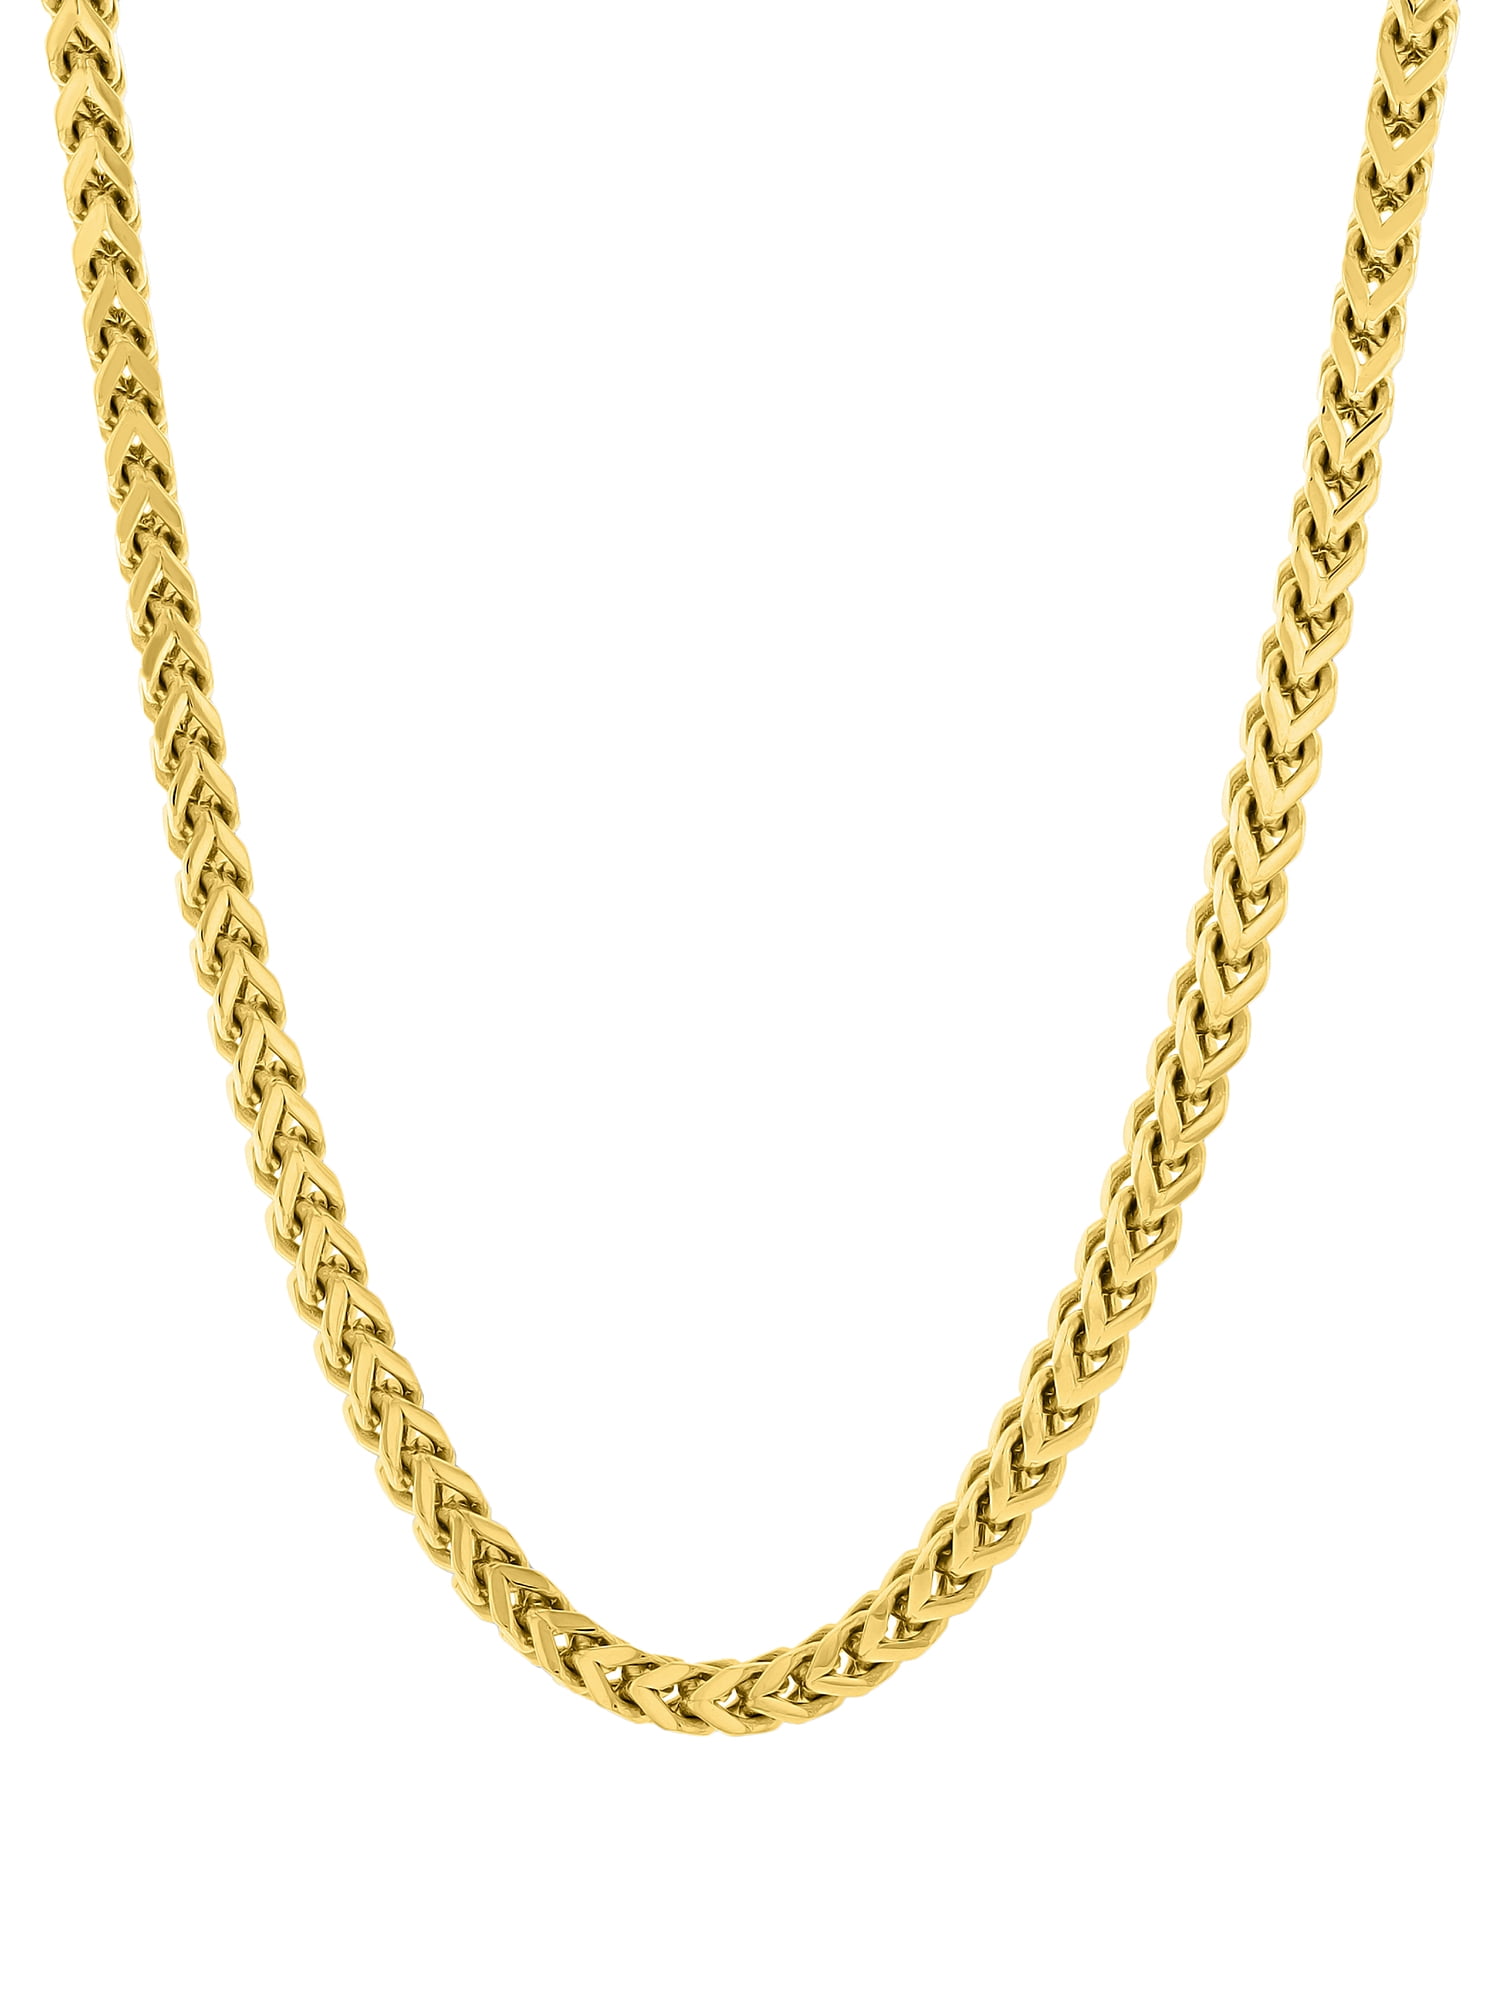 New Mens Yellow Gold Over Sterling Silver Initial Letter C Franco Chain Necklace 